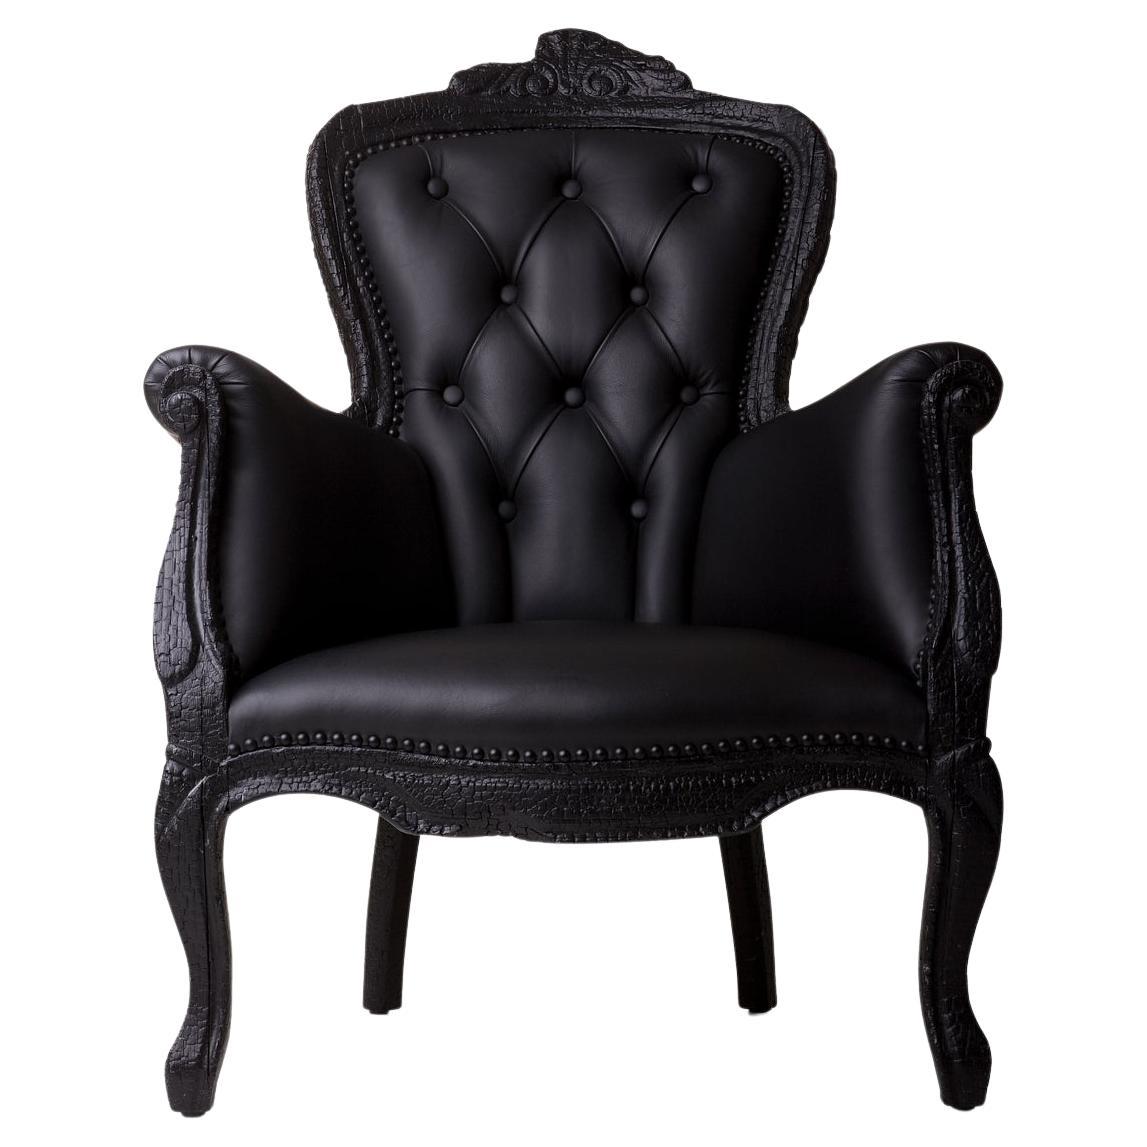 Moooi Smoke Armchair in Shade Pitch Black Upholstery by Maarten Baas For Sale